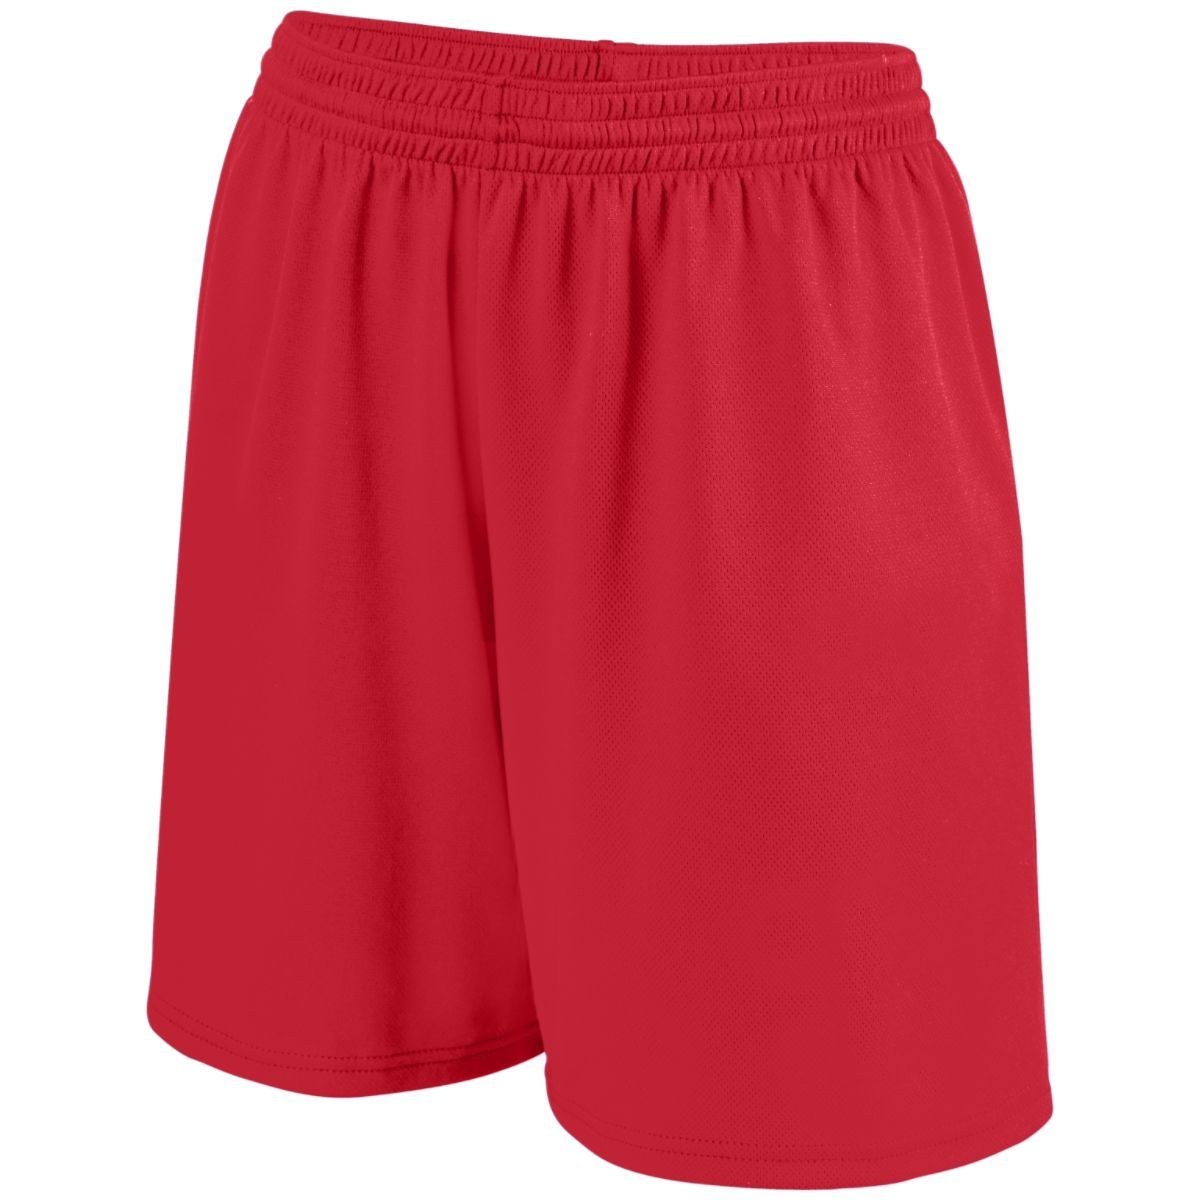 Augusta Sportswear Girls Shockwave Shorts in Red/White  -Part of the Girls, Augusta-Products, Softball, Girls-Shorts product lines at KanaleyCreations.com